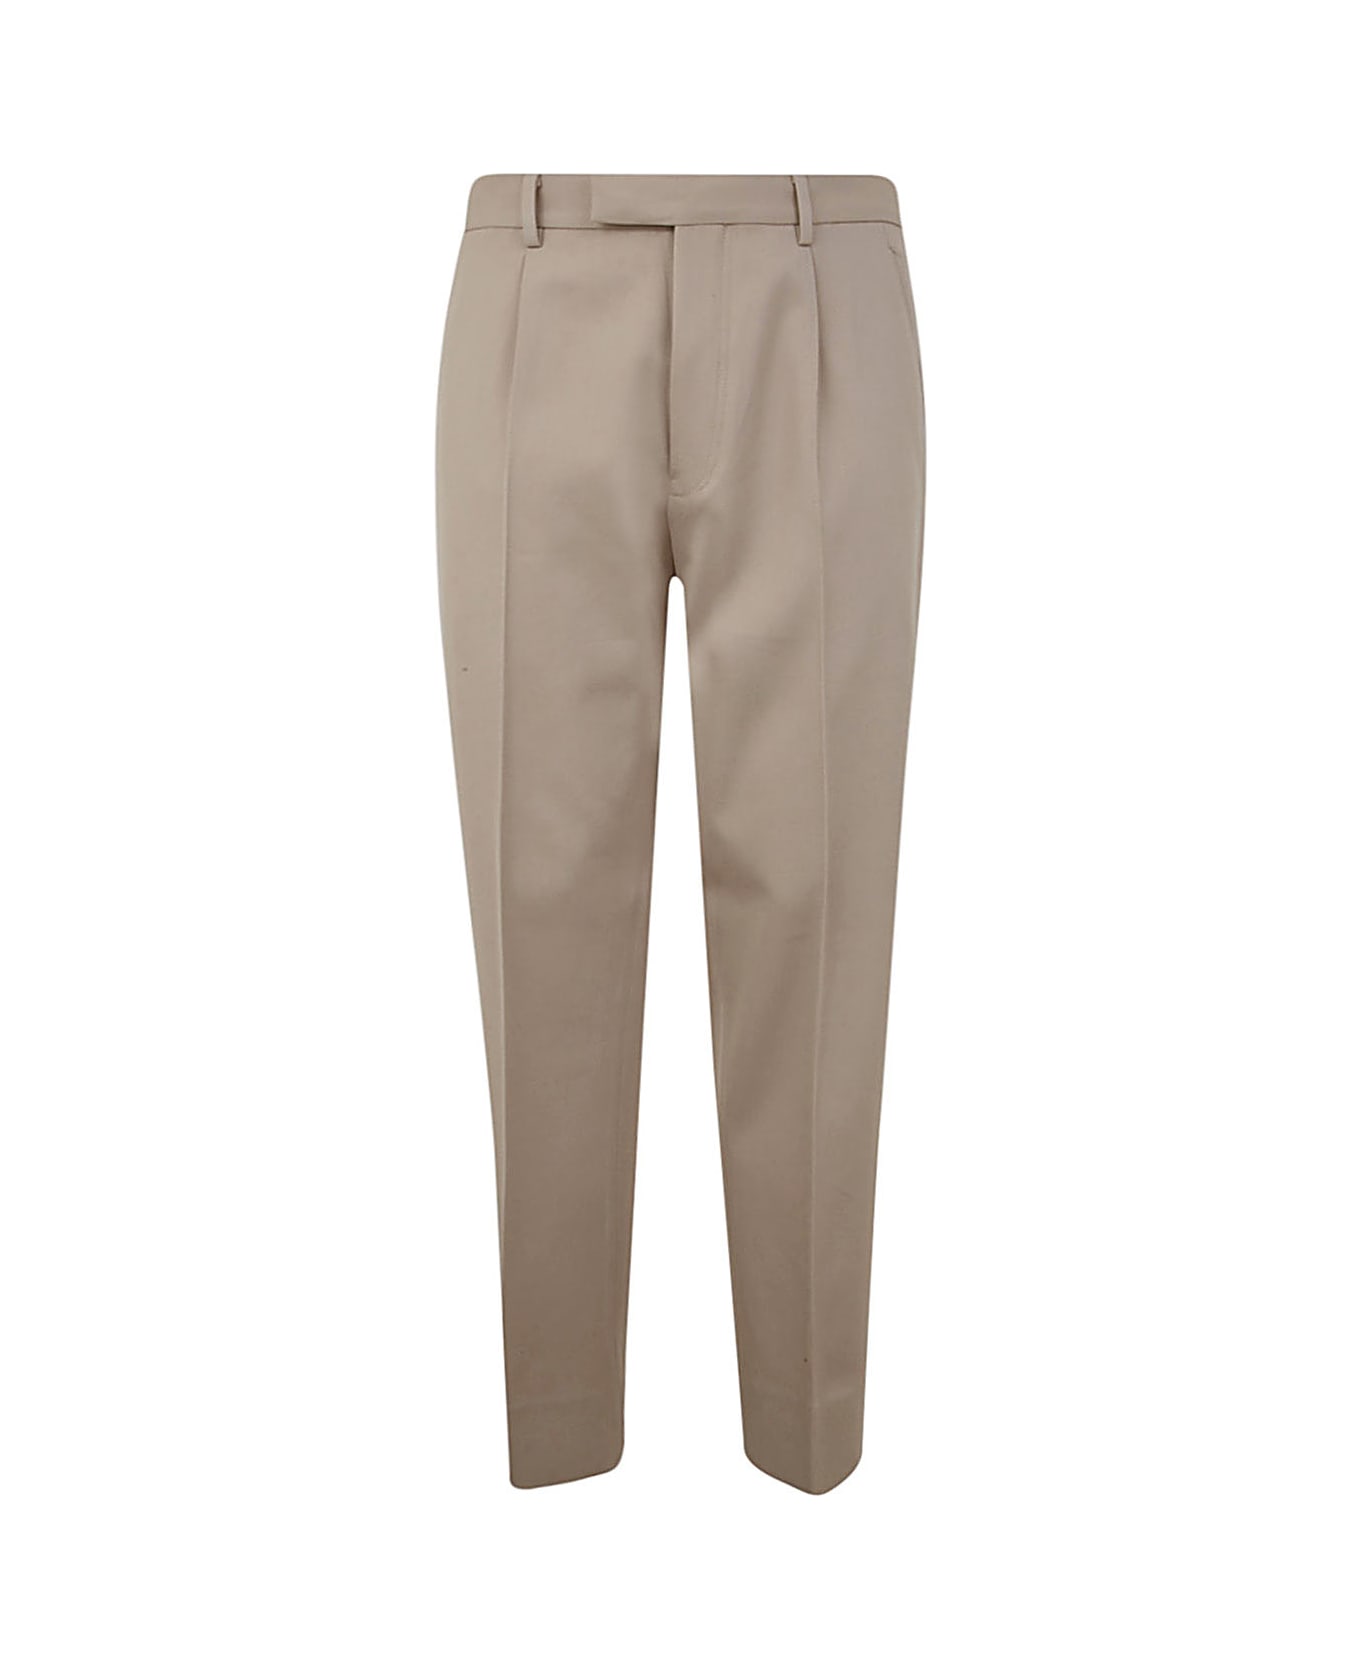 Zegna Cotton And Wool Pants - Beige